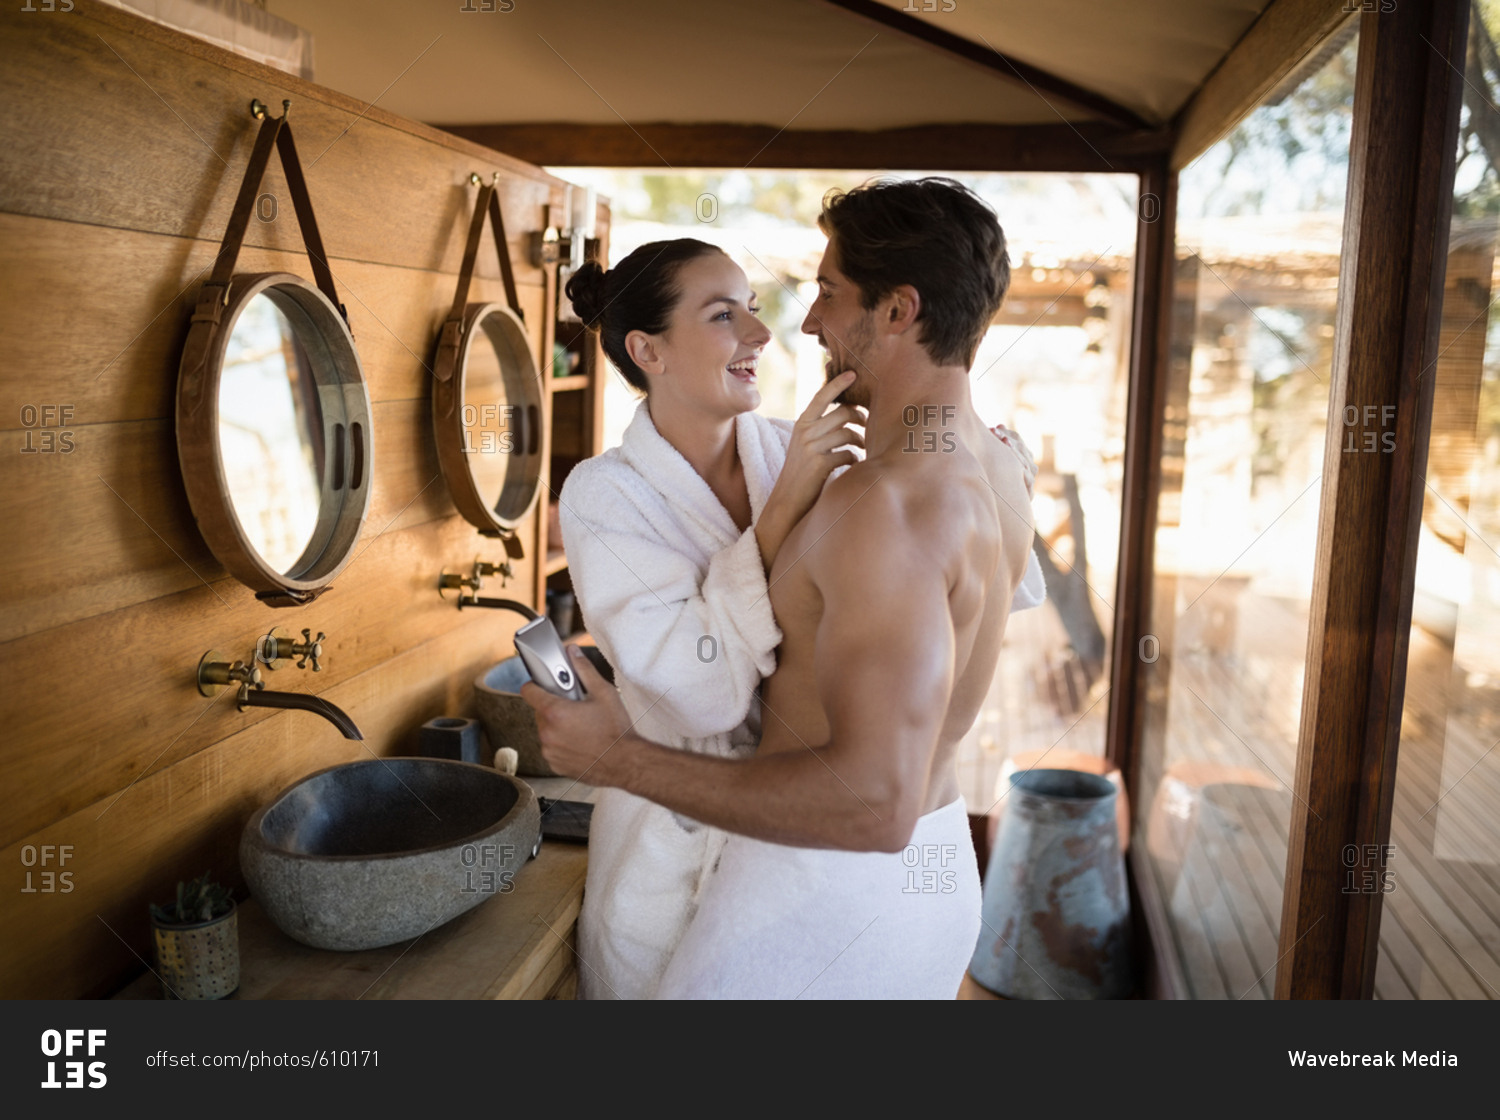 Couple having fun together in cottage during safari vacation